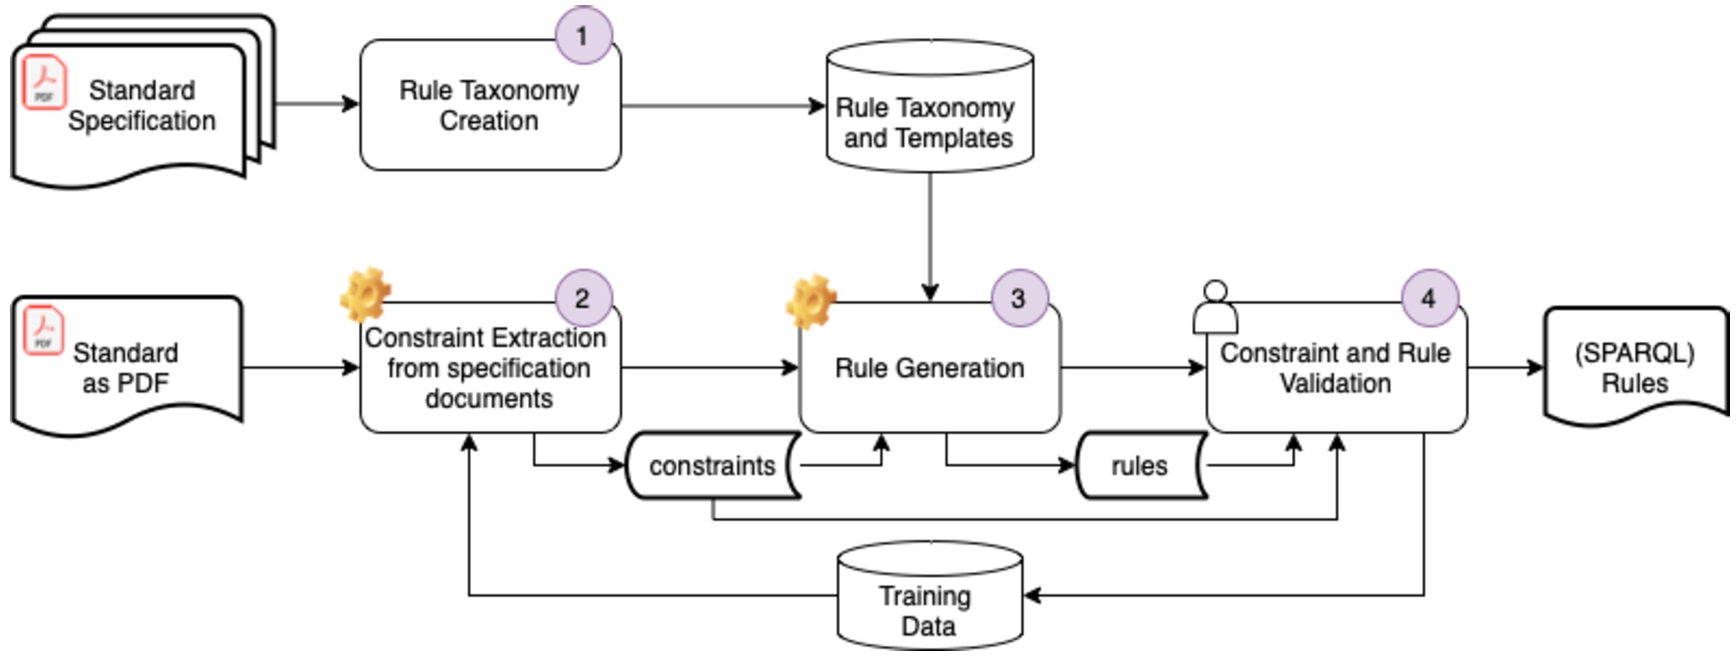 Overall approach for deriving rules from specifications of industrial standards.